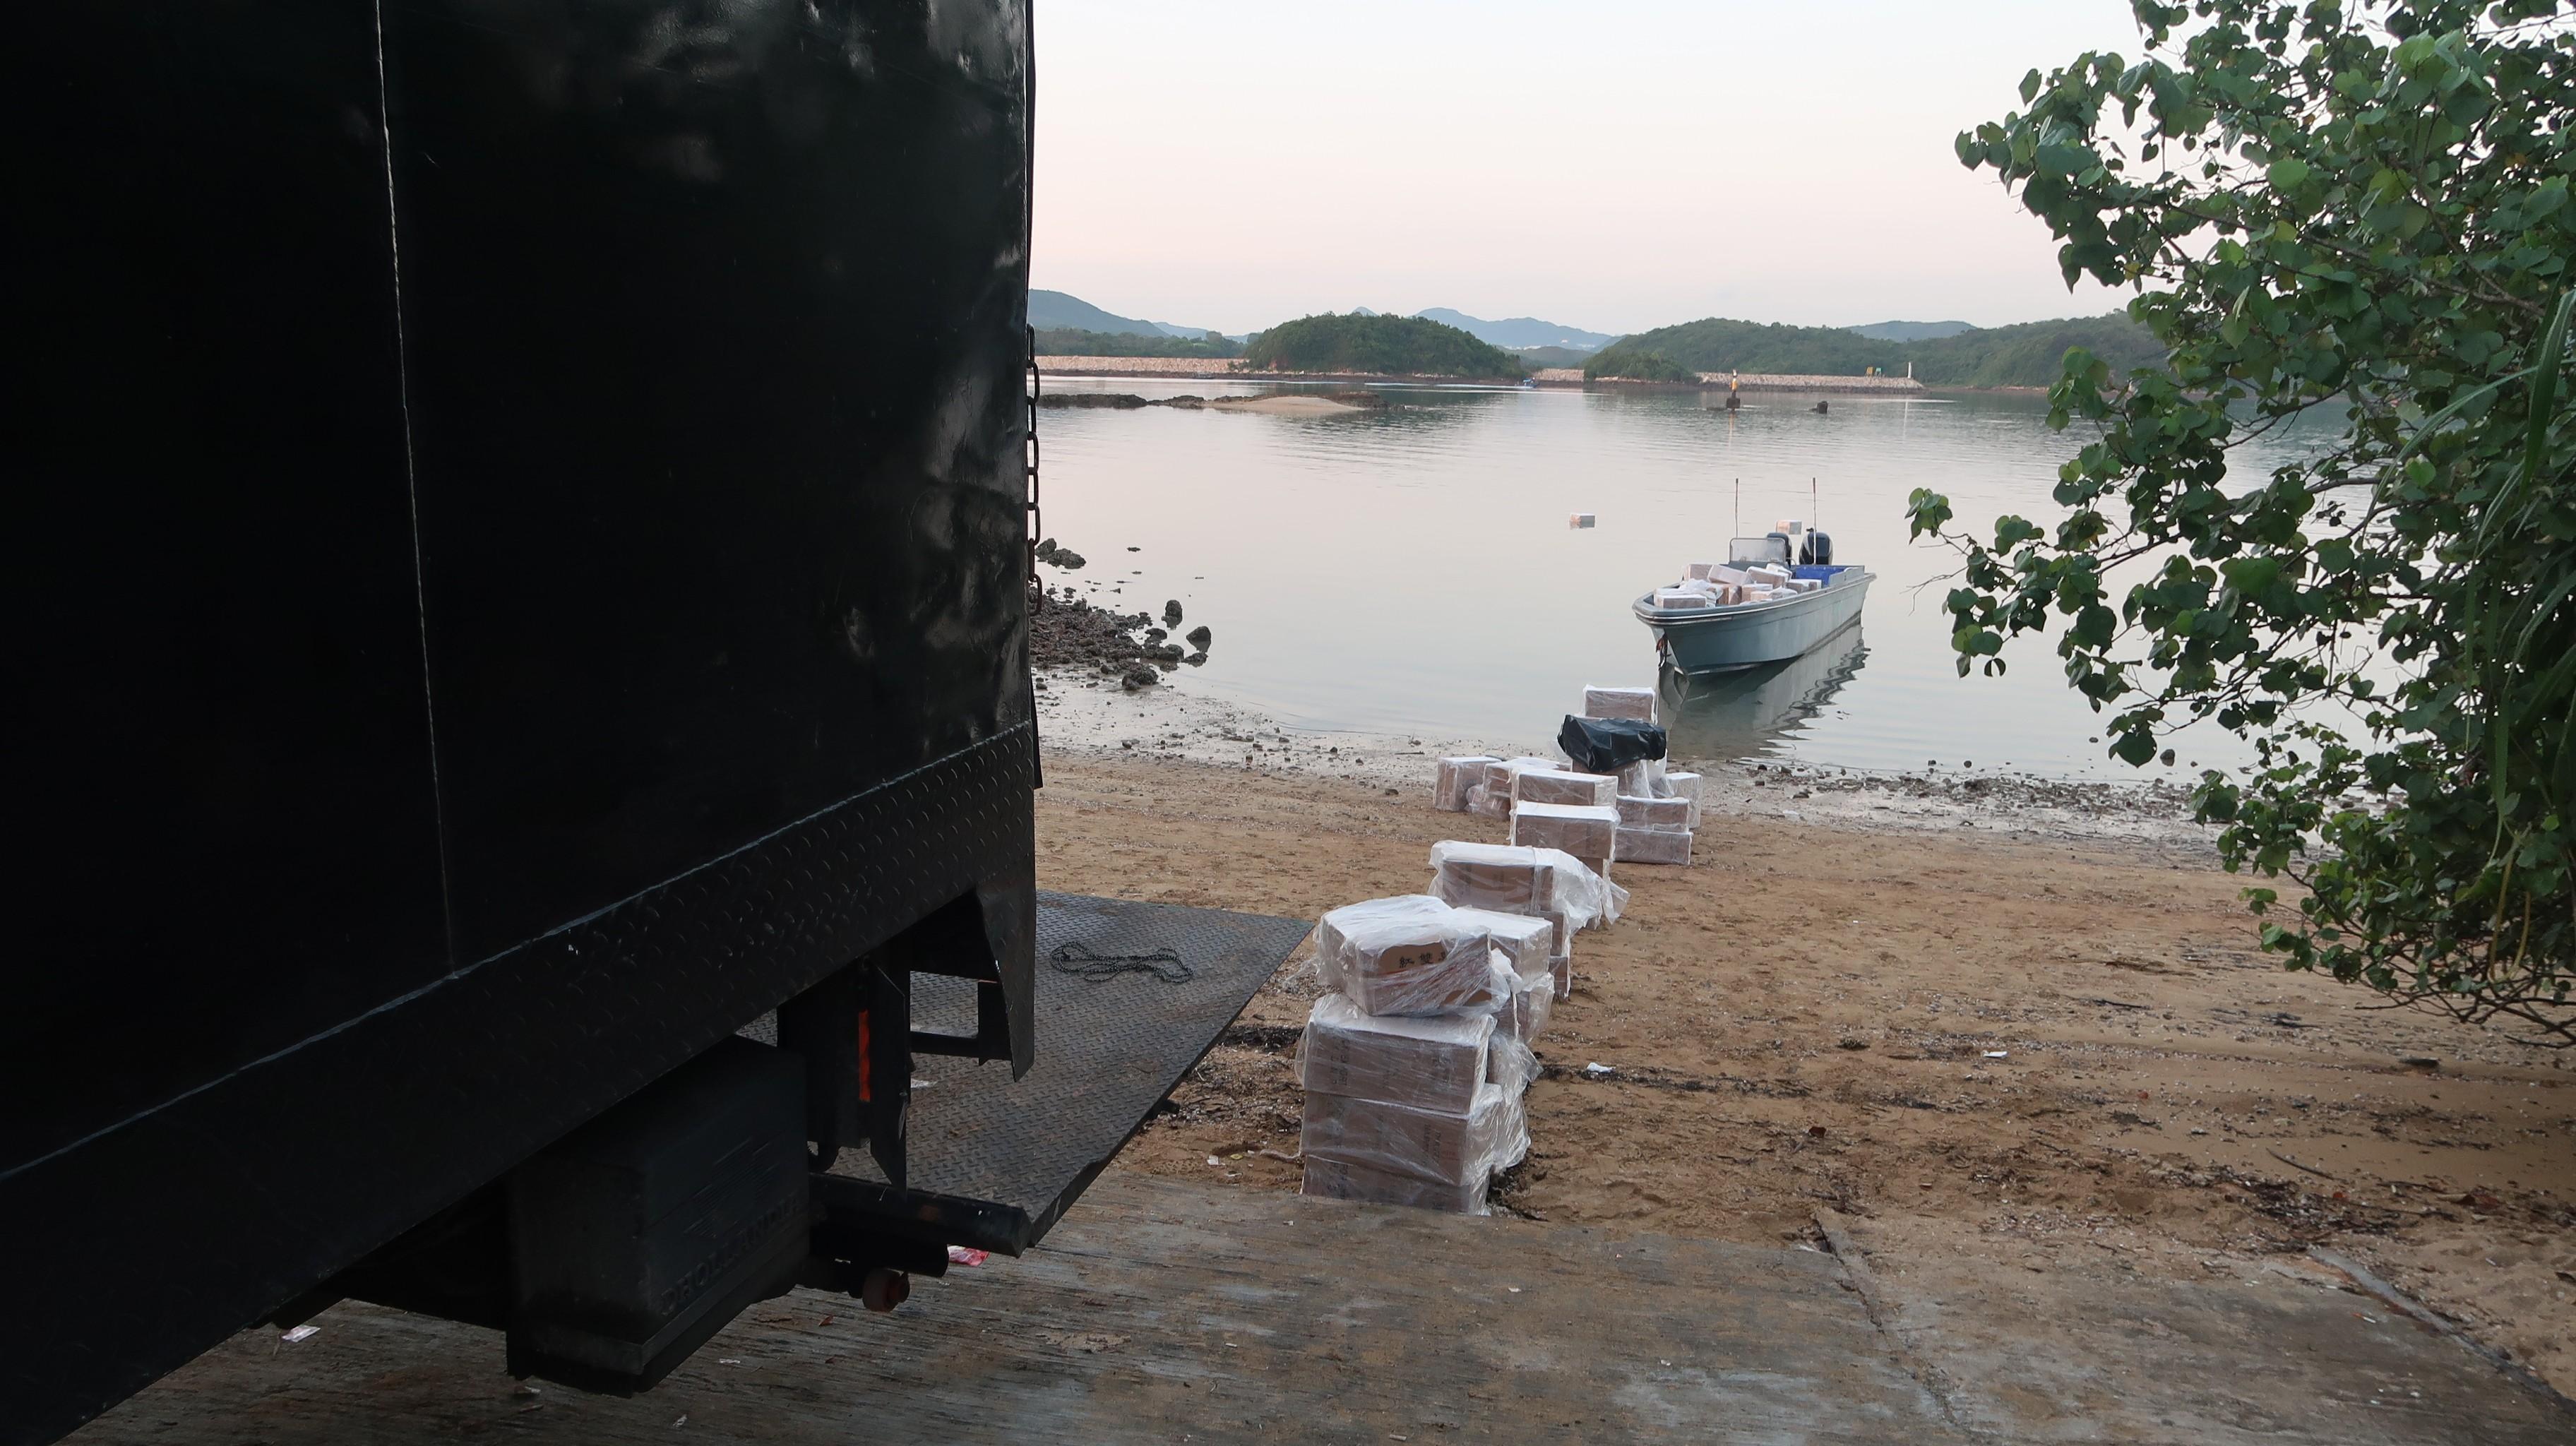 Hong Kong Customs and Marine Police conducted a joint operation in Sai Kung yesterday (September 21) and seized about 2.2 million suspected illicit cigarettes with an estimated market value of about $8.2 million and a duty potential of about $5.6 million. Photo shows the suspected illicit cigarettes seized at the shore of a pier in Tsam Chuk Wan, and the detained speedboat suspected to be connected with the case.